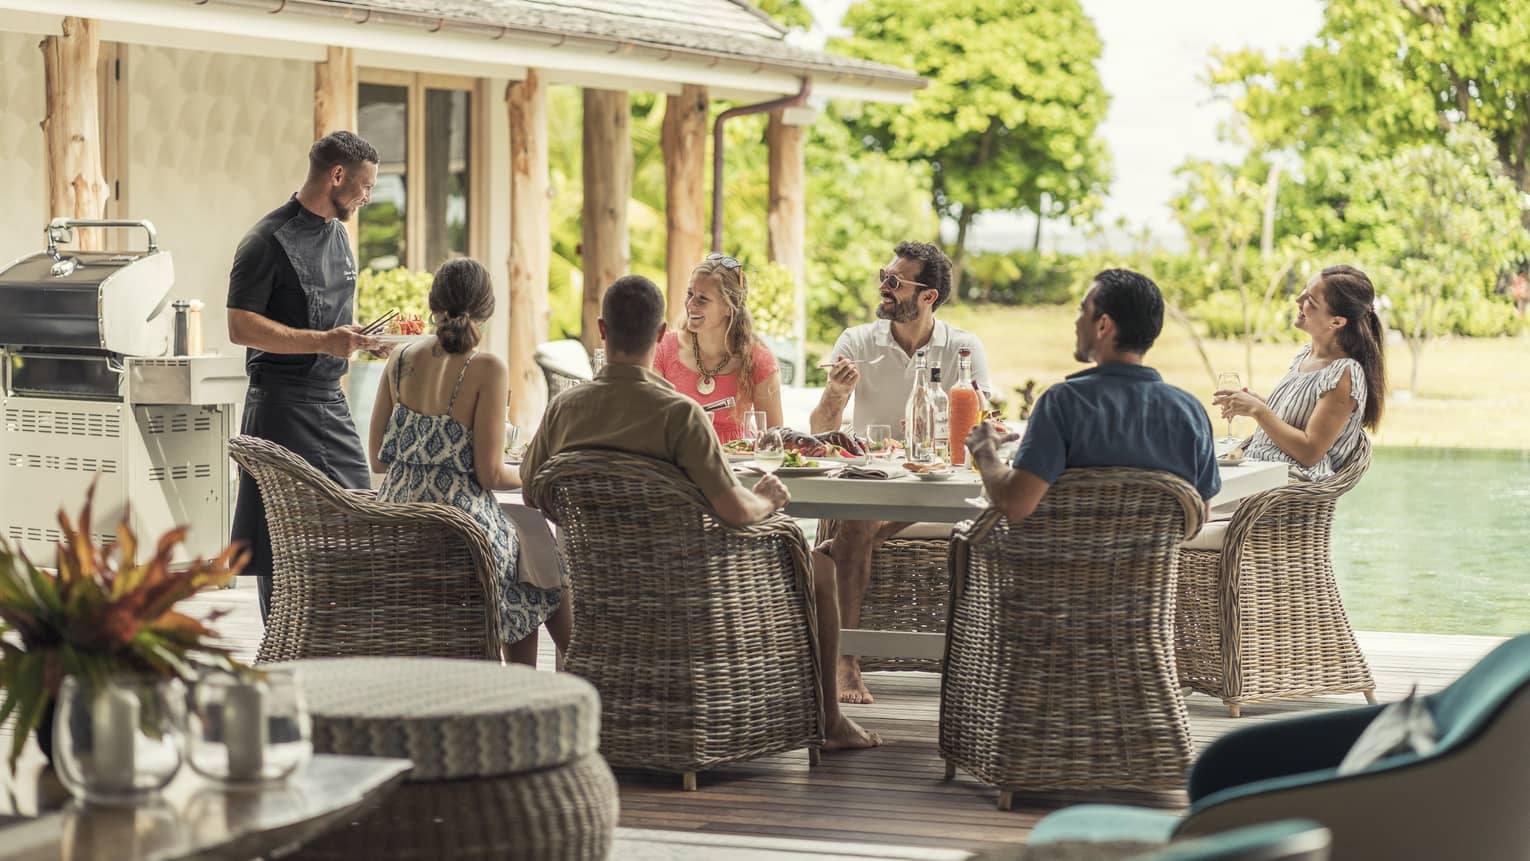 Group of men and women on wicker chairs by pool eating and talking to chef